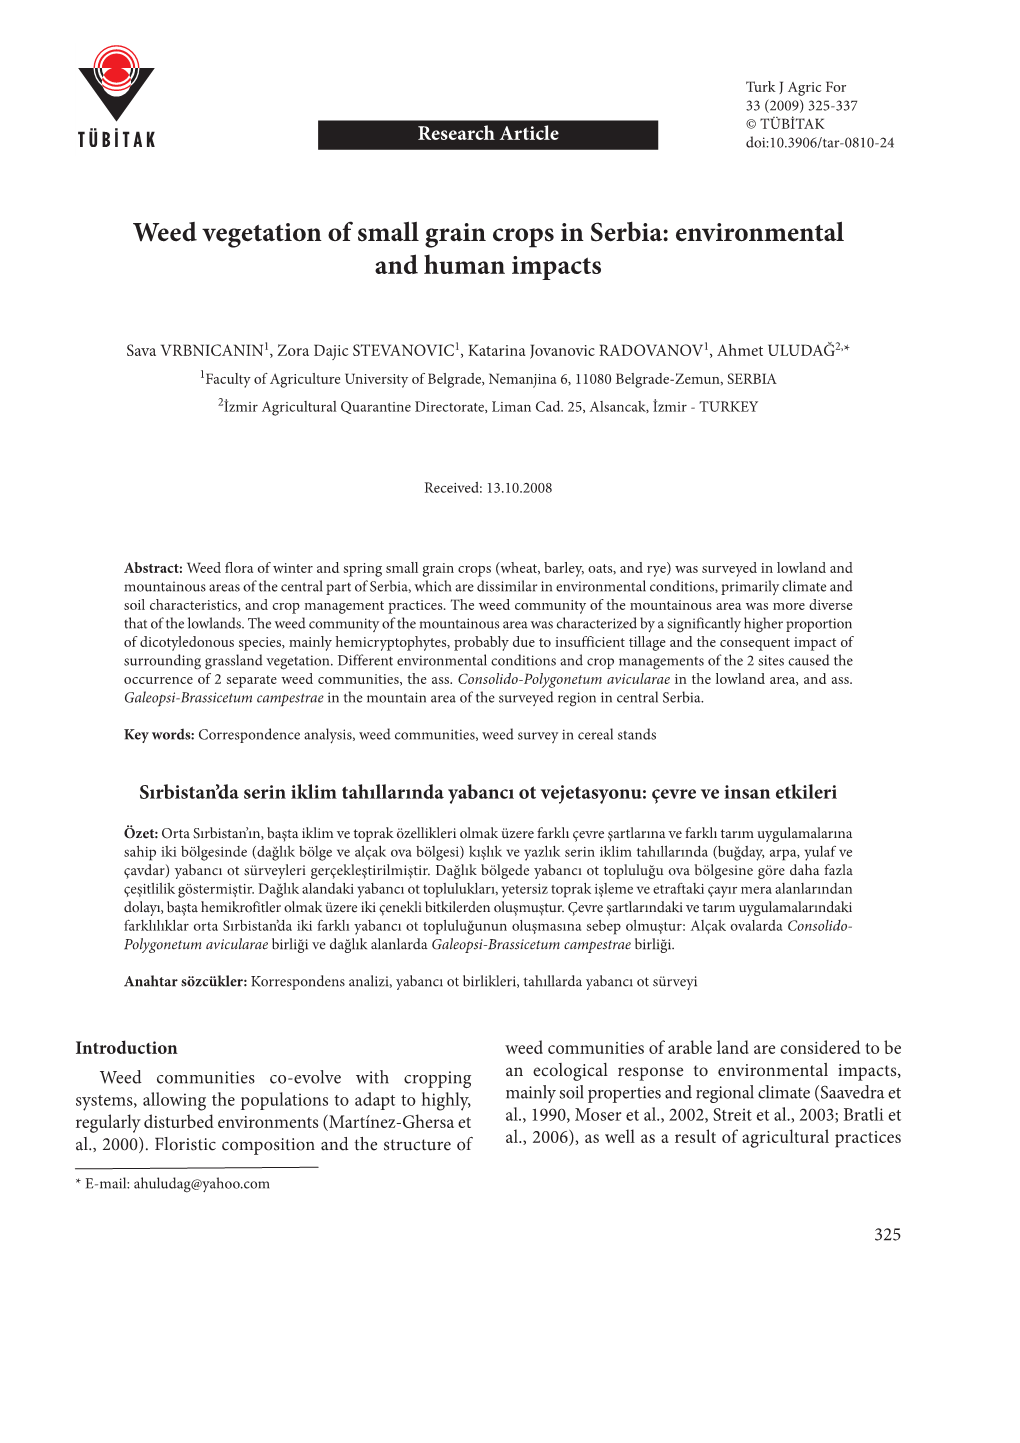 Weed Vegetation of Small Grain Crops in Serbia: Environmental and Human Impacts